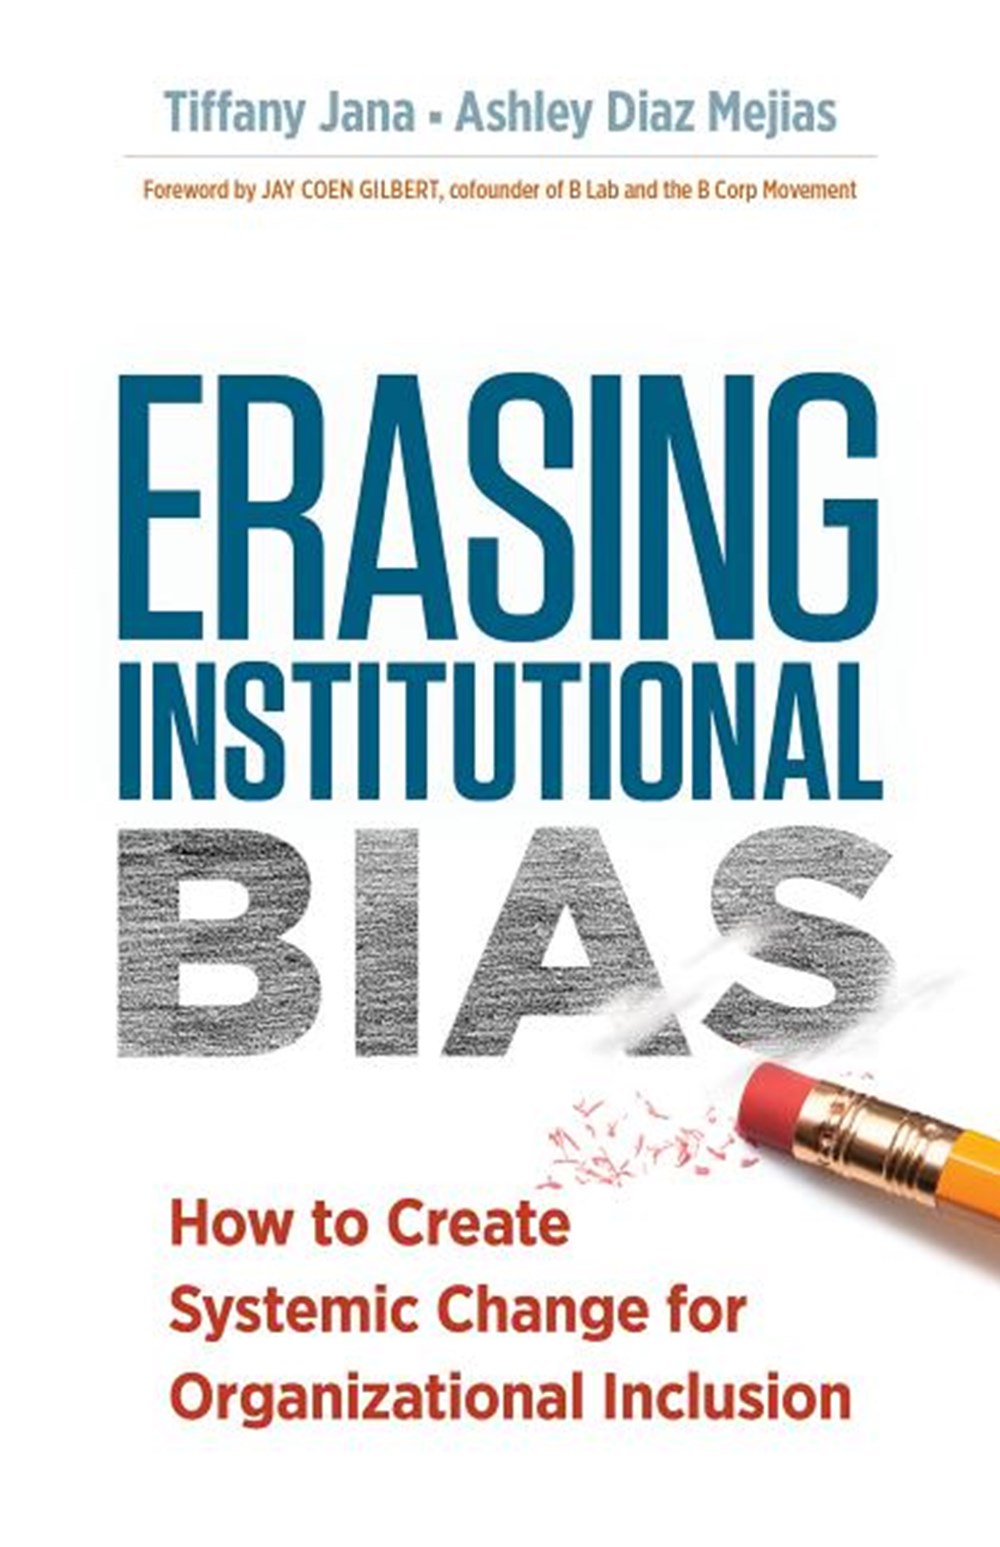 Erasing Institutional Bias How to Create Systemic Change for Organizational Inclusion